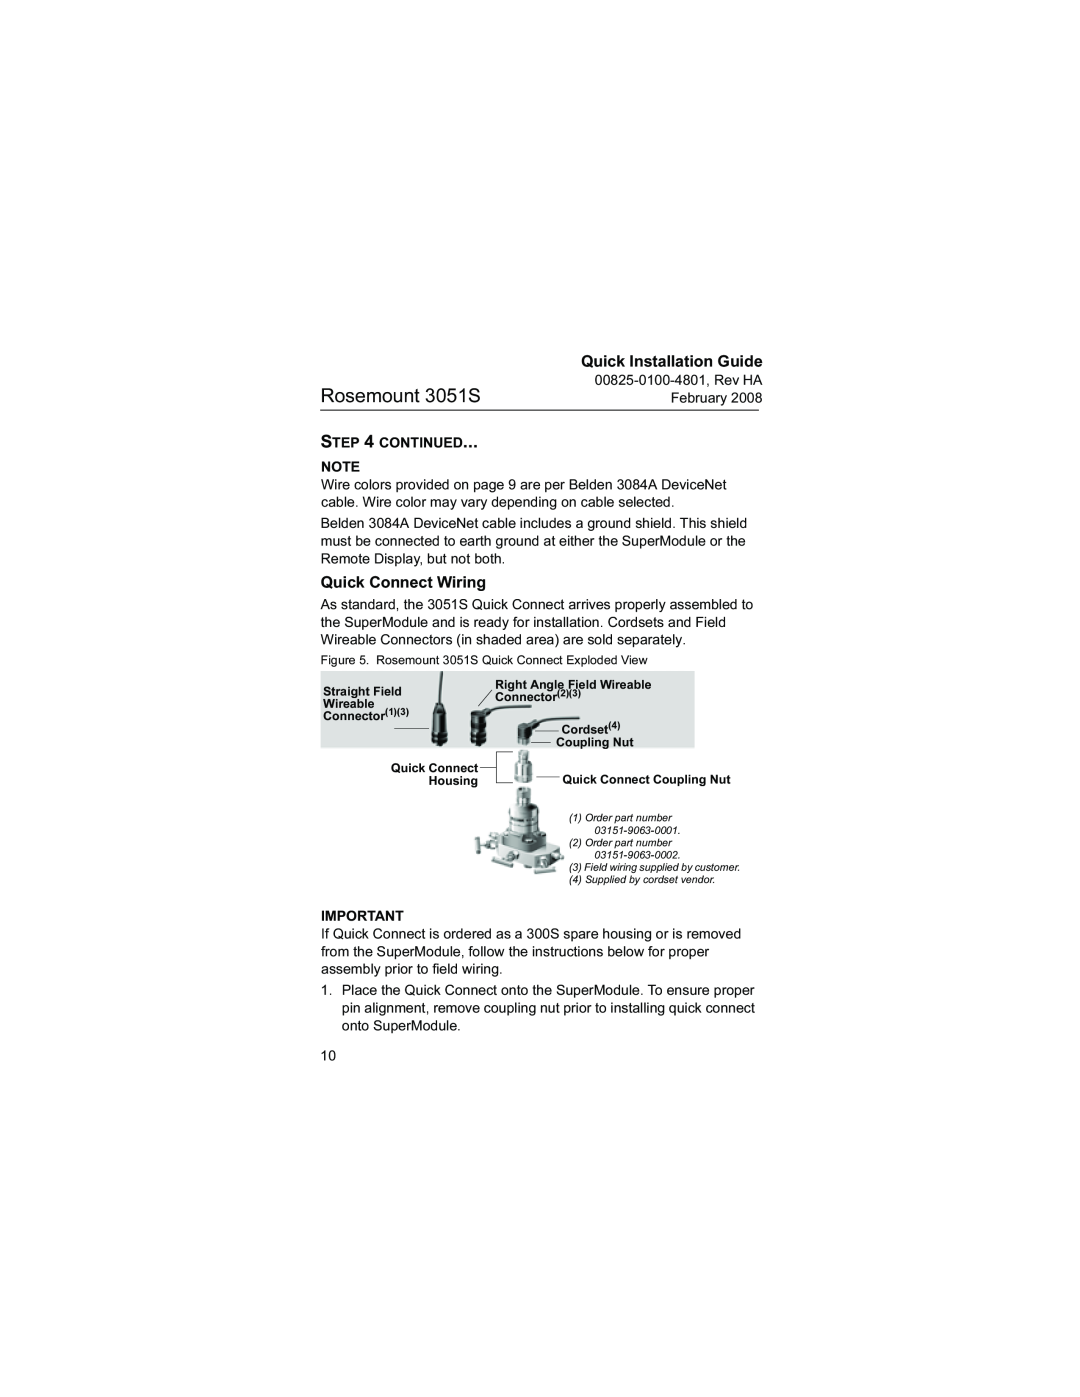 Emerson manual Quick Connect Wiring, Rosemount 3051S, Quick Installation Guide, Order part number 2 Order part number 